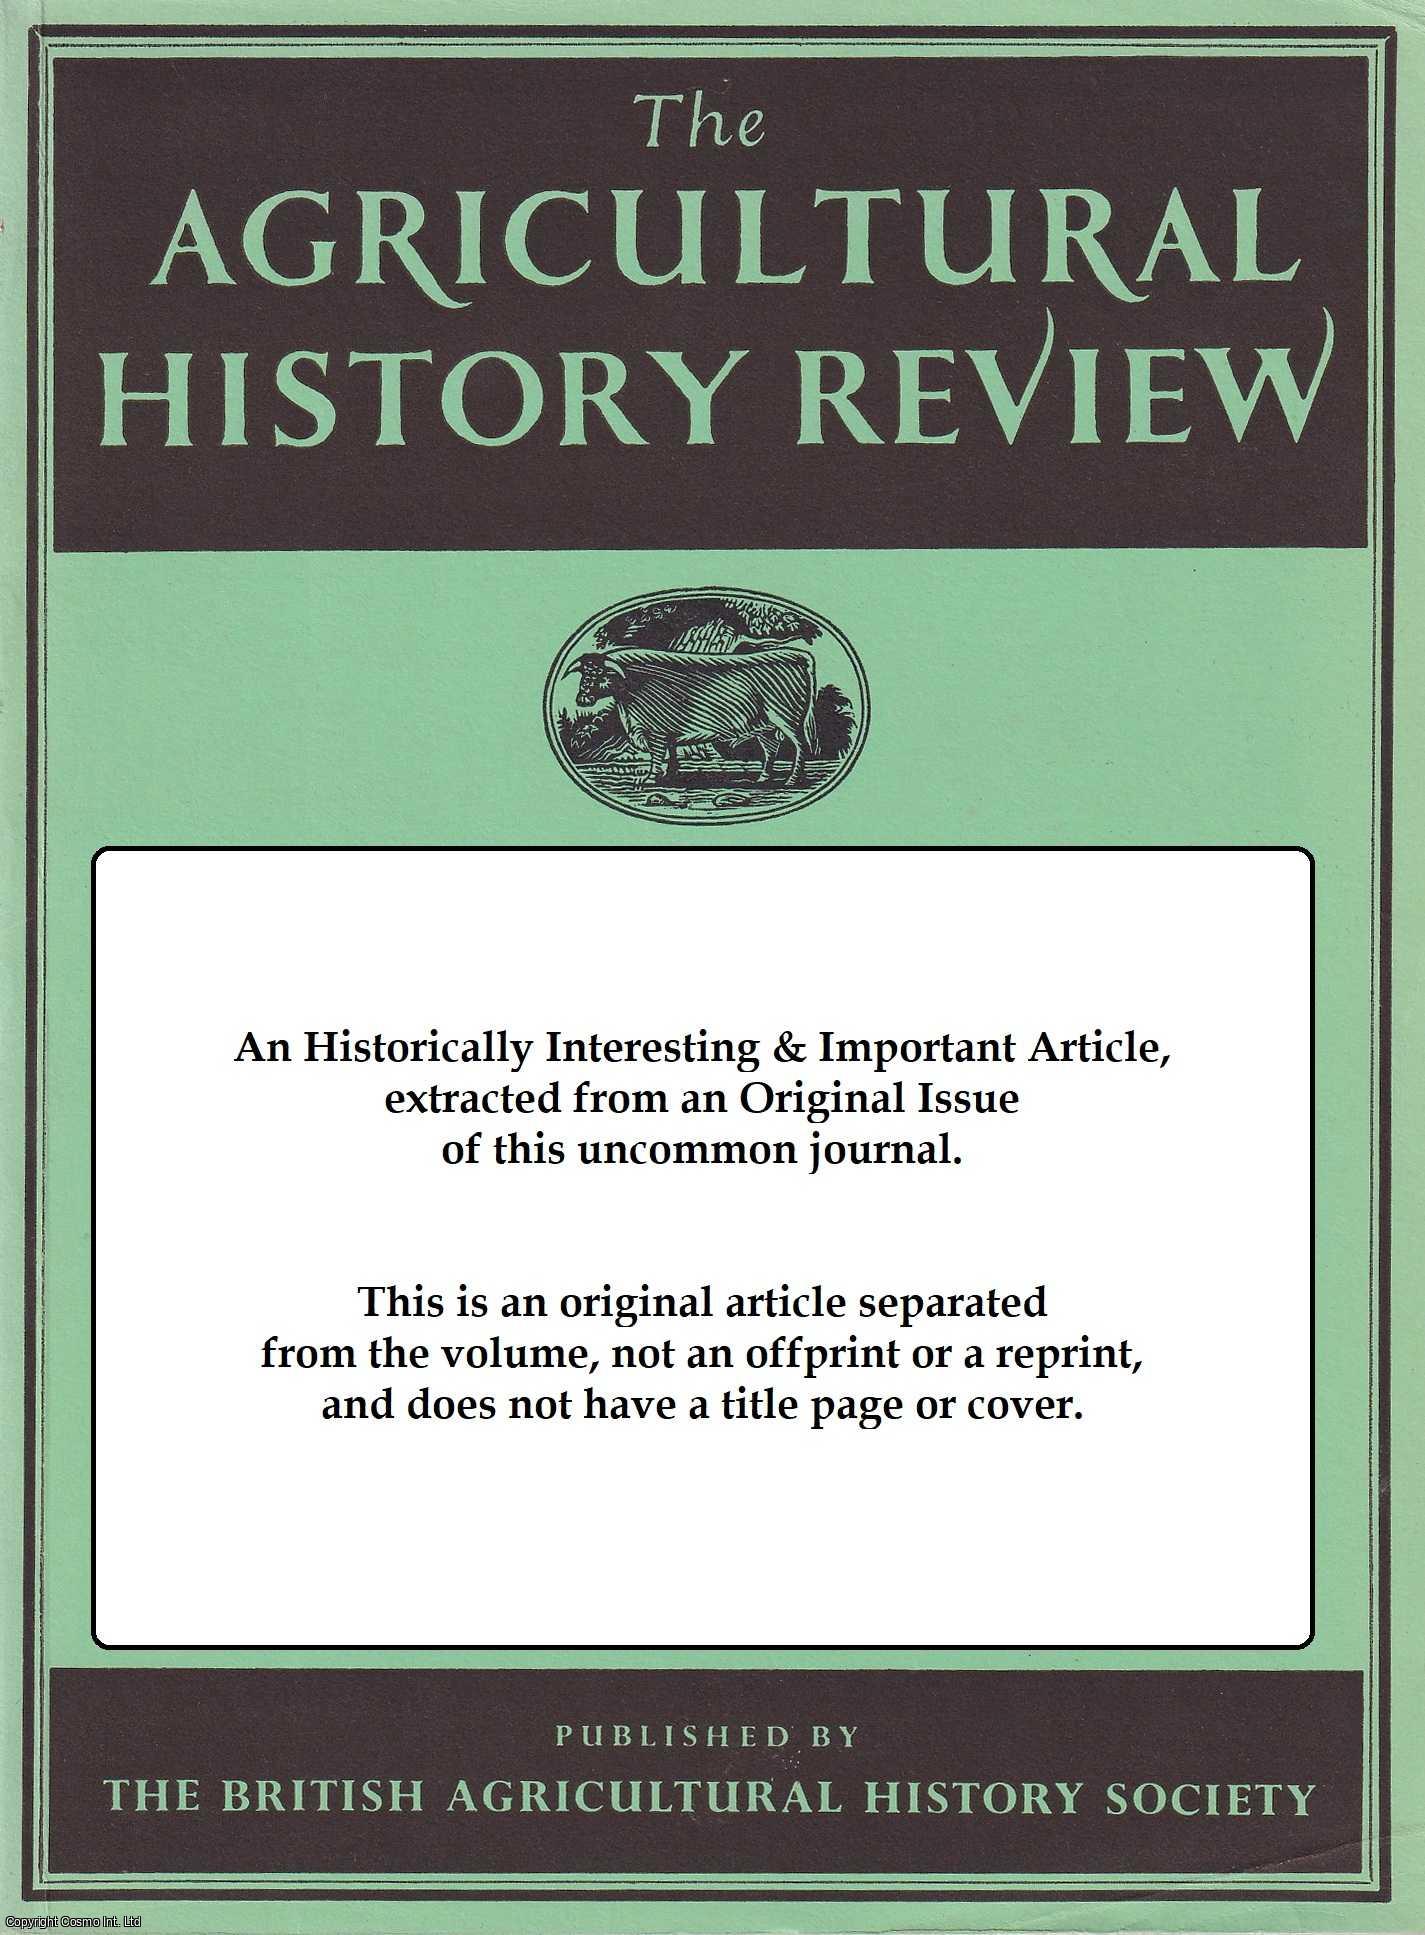 P. Roebuck - Absentee Landownership in the Late Seventeenth & Early Eighteenth Centuries : a neglected factor in English Agrarian History. An original article from the Agricultural History Review, 1973.